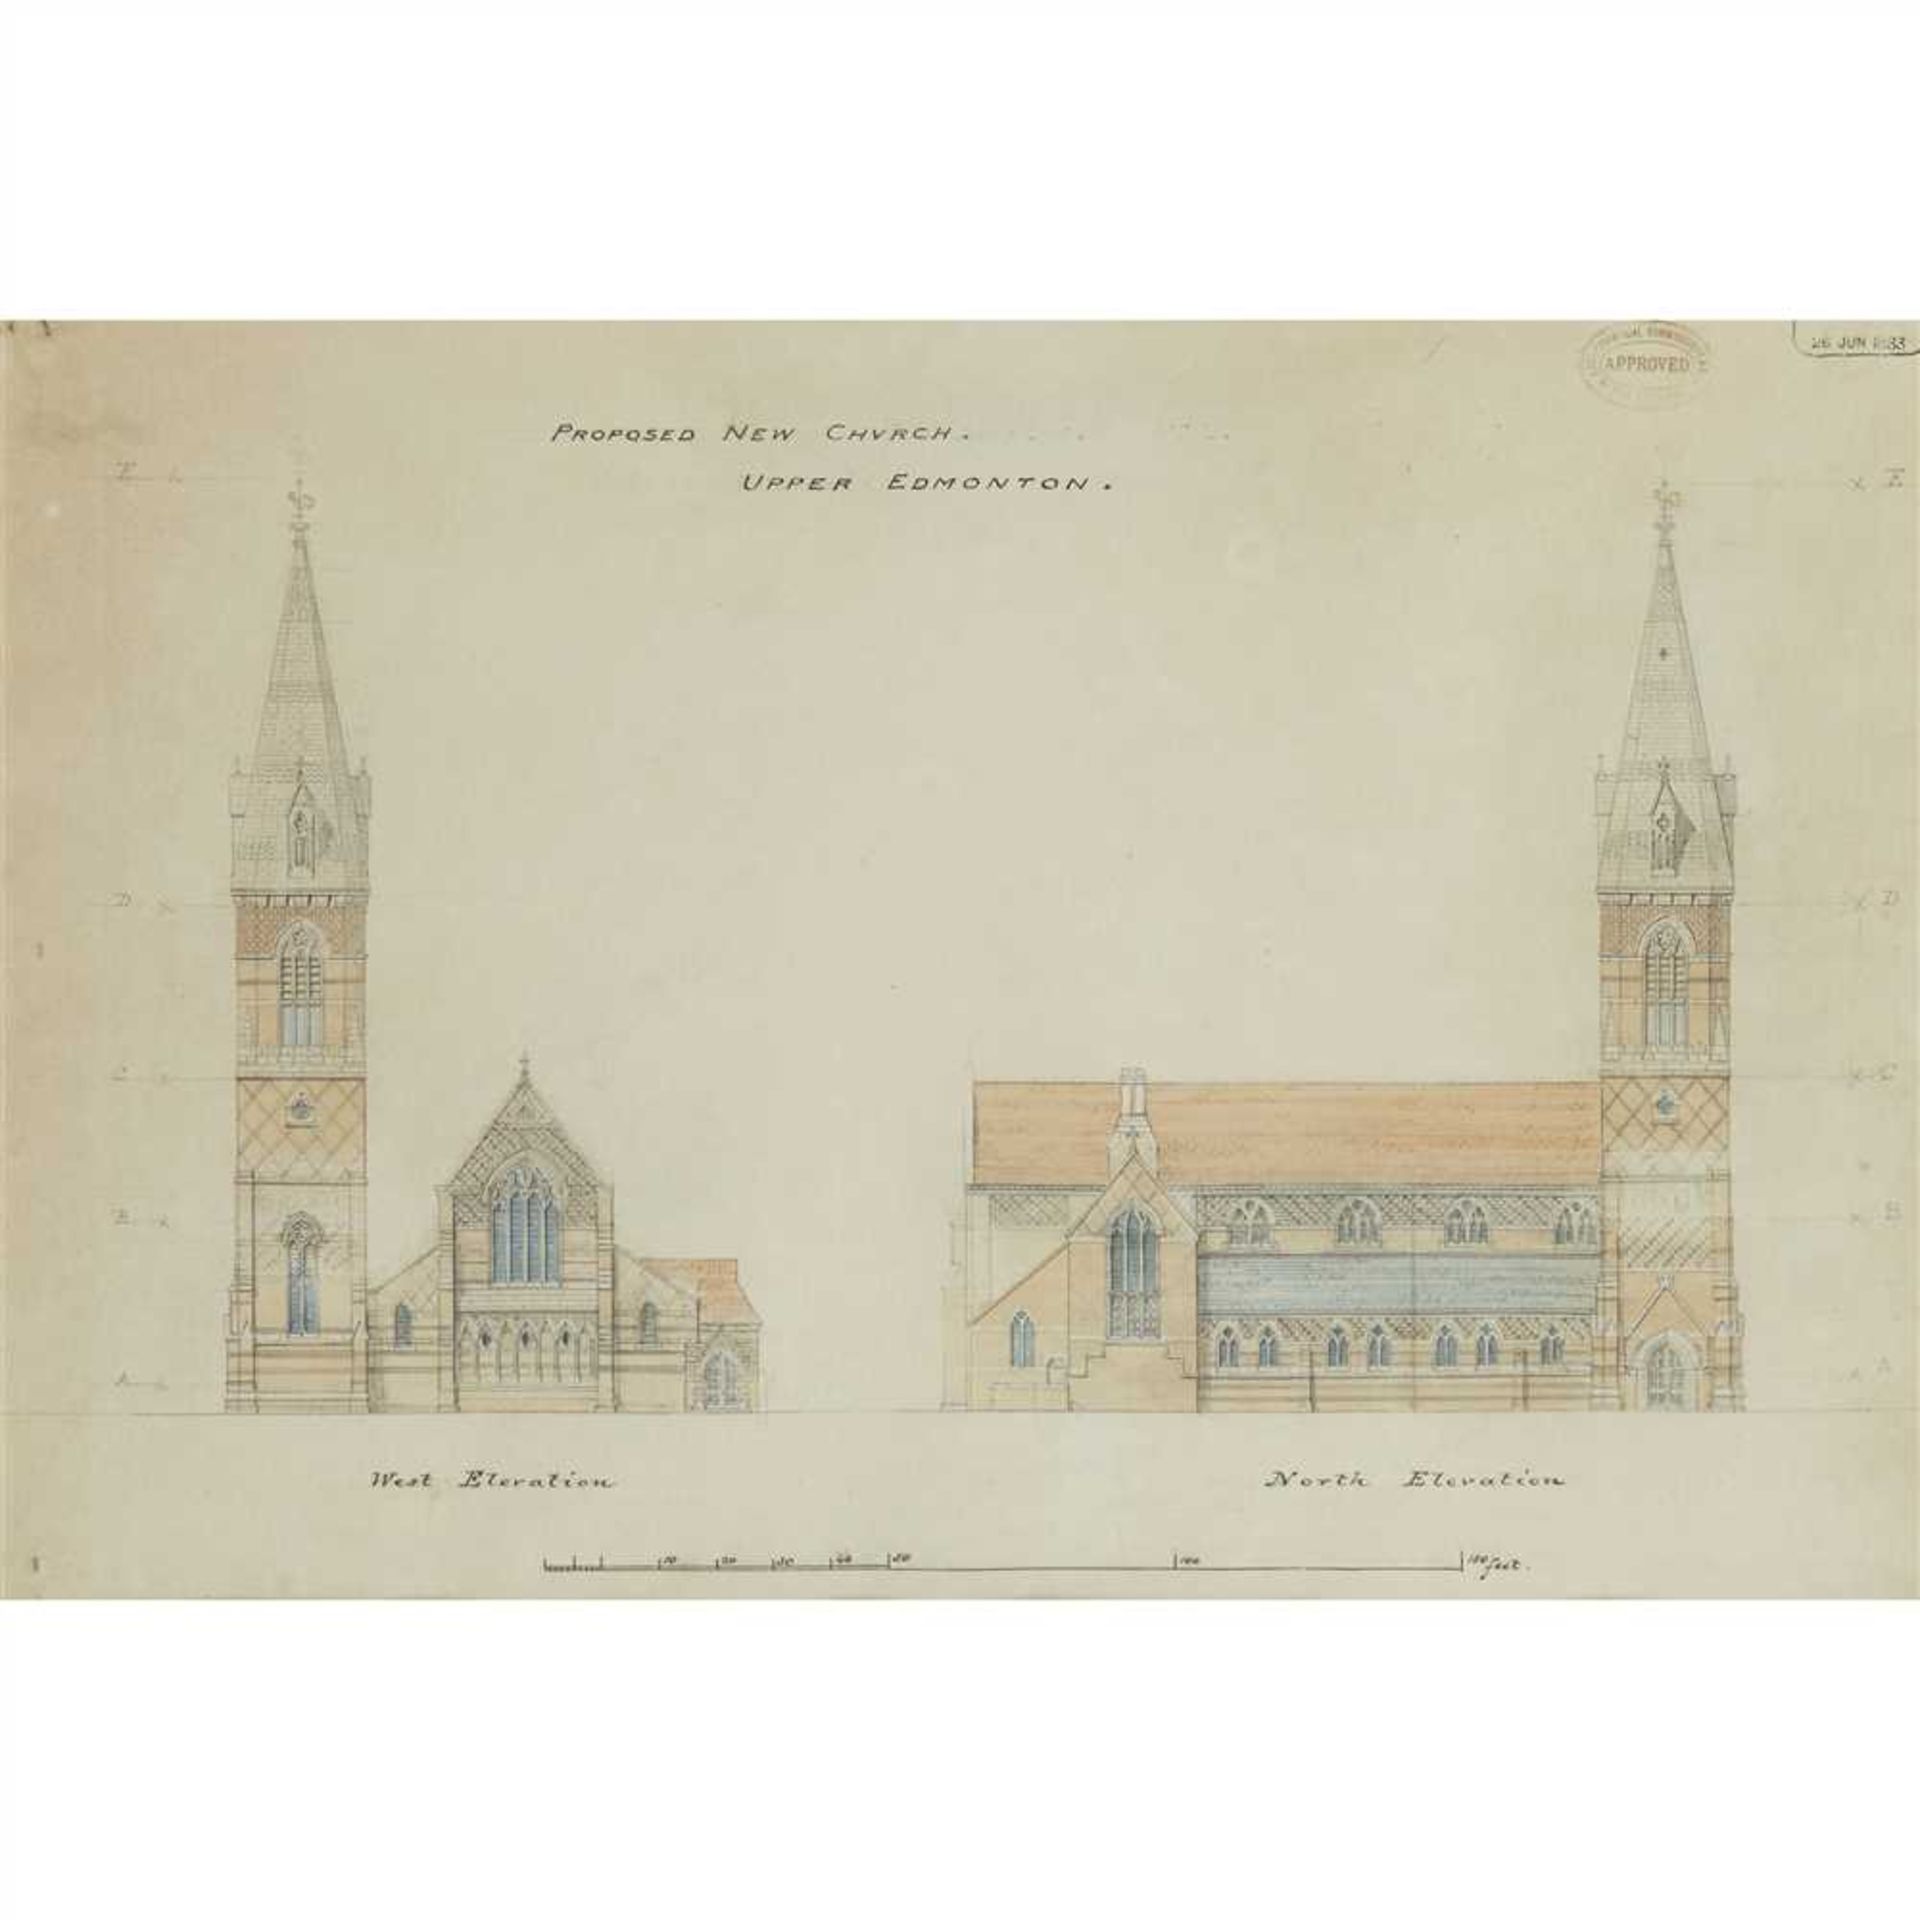 WILLIAM BUTTERFIELD (1814-1900) PROPOSED NEW CHURCH: UPPER EDMONTON, FOUR GOTHIC REVIVAL DRAWINGS, - Image 6 of 10